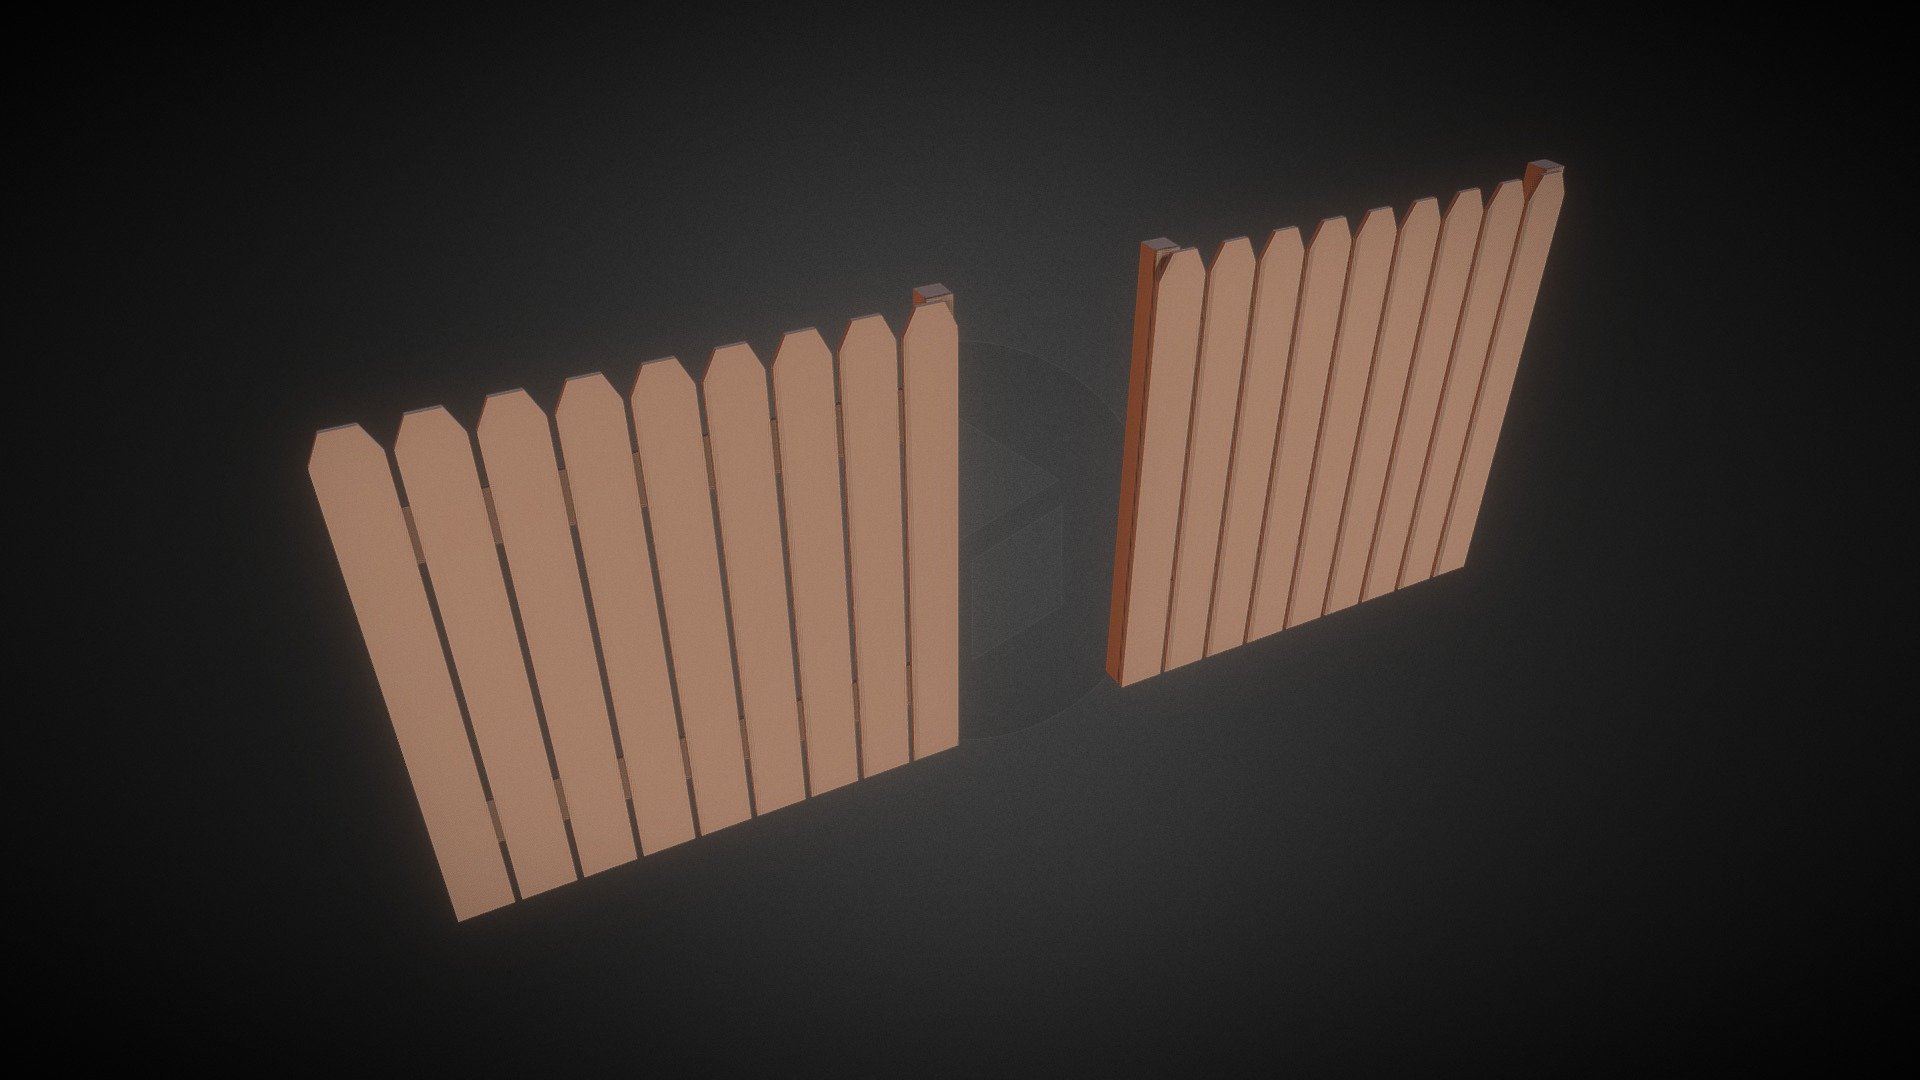 Low poly styled privacy fence, easy to implement in any game or 3d project 3d model